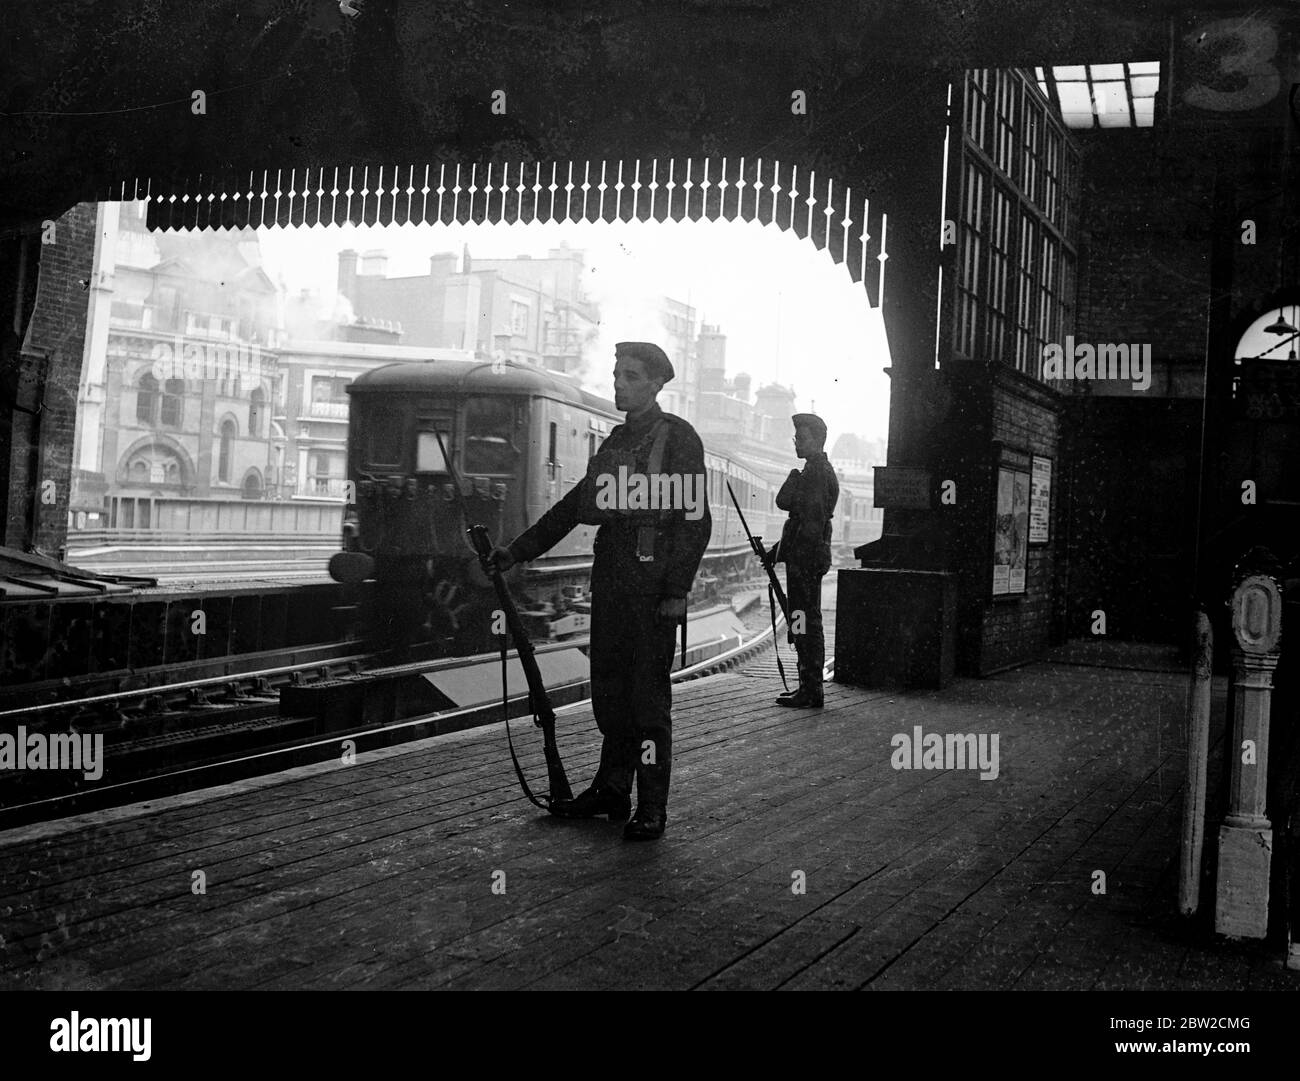 Military guards have been installed at vital points in London, including railway stations, goods yards and important municipal buildings. Military guards on a train platform at a London train station. 30 August 1939 Stock Photo